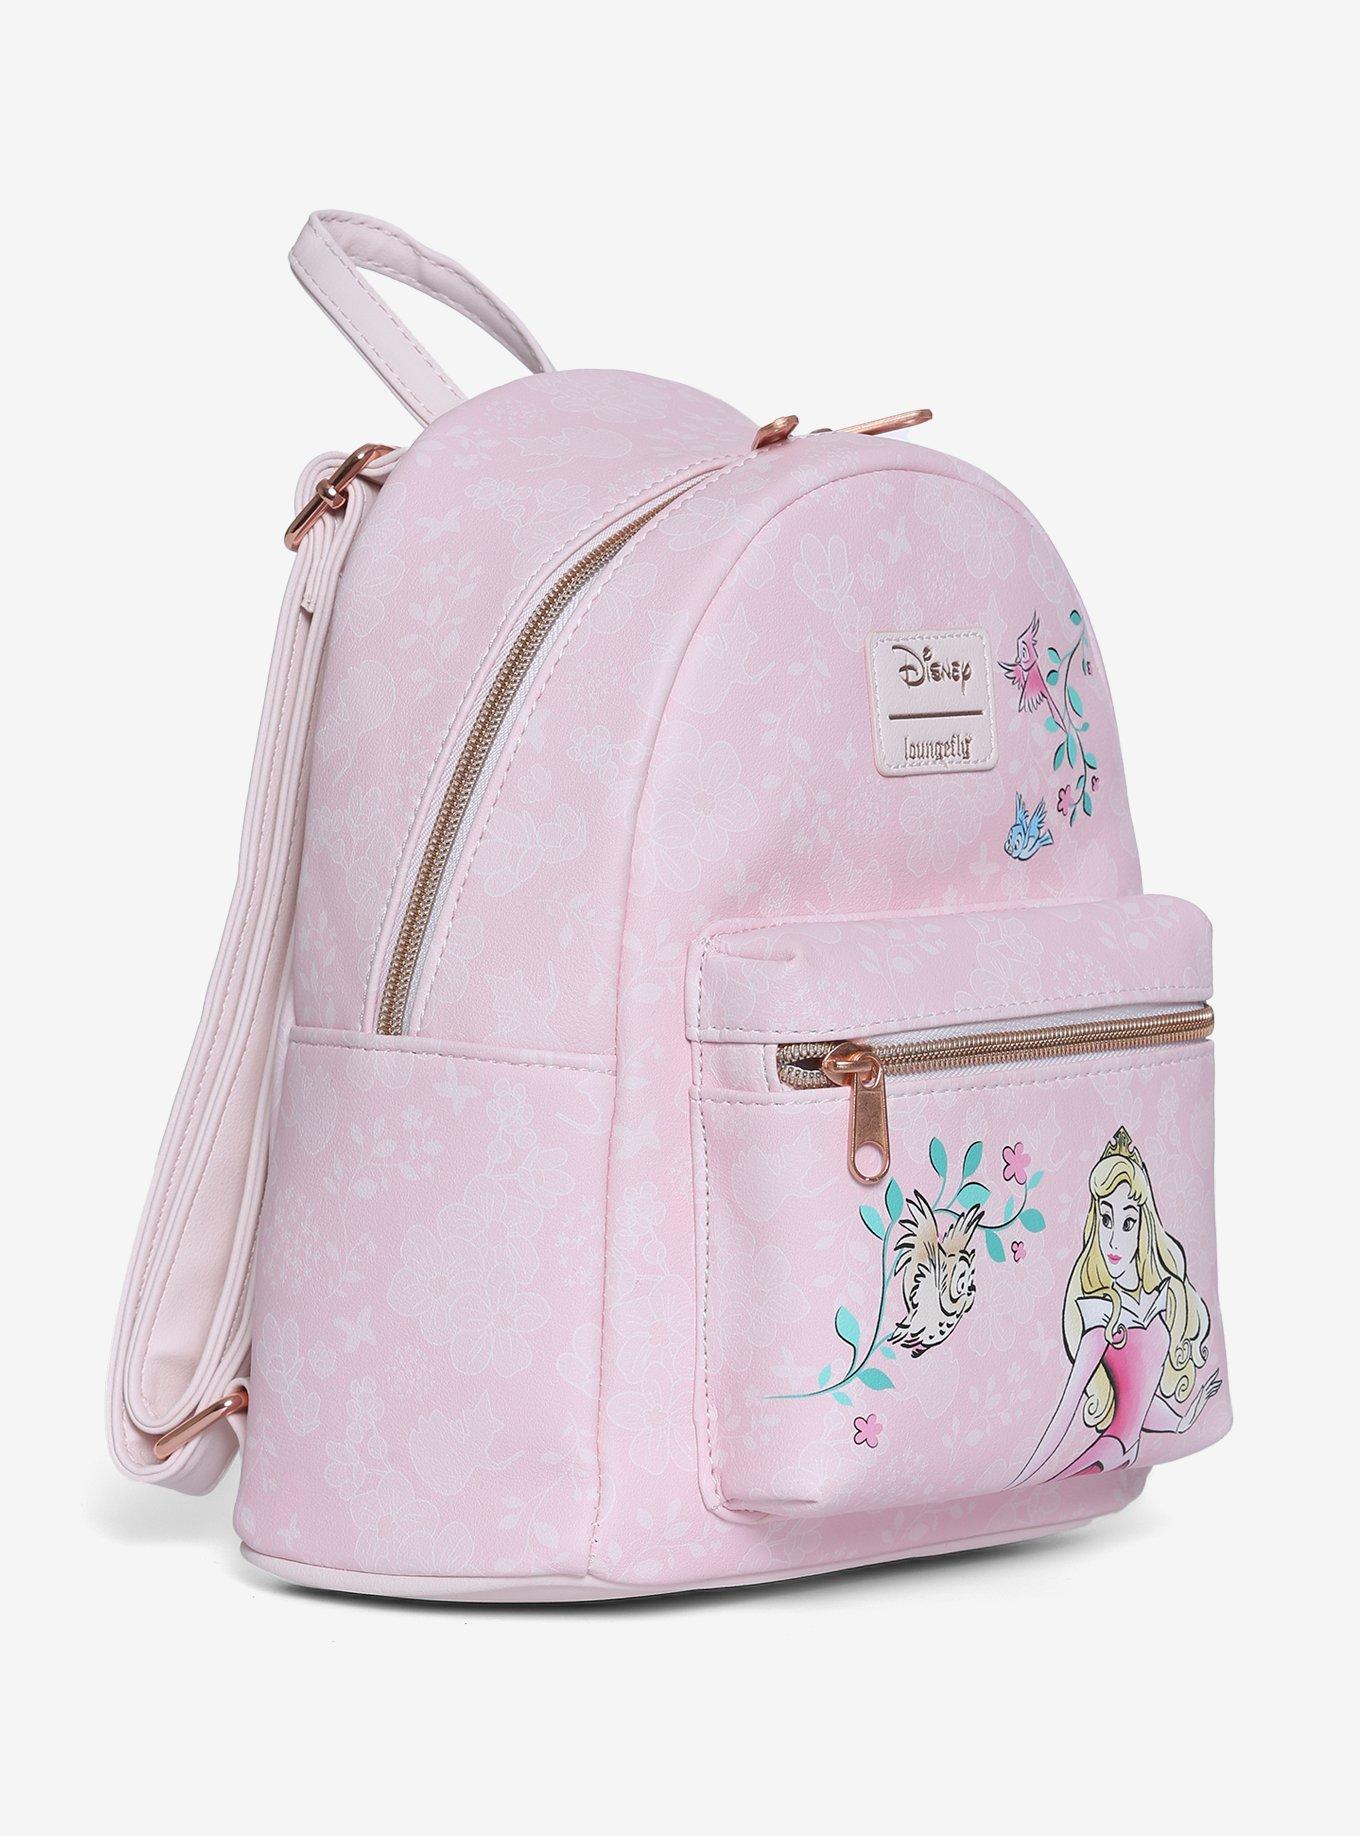 Aurora And Maleficent Mini Backpack for Sale in Palmdale, CA